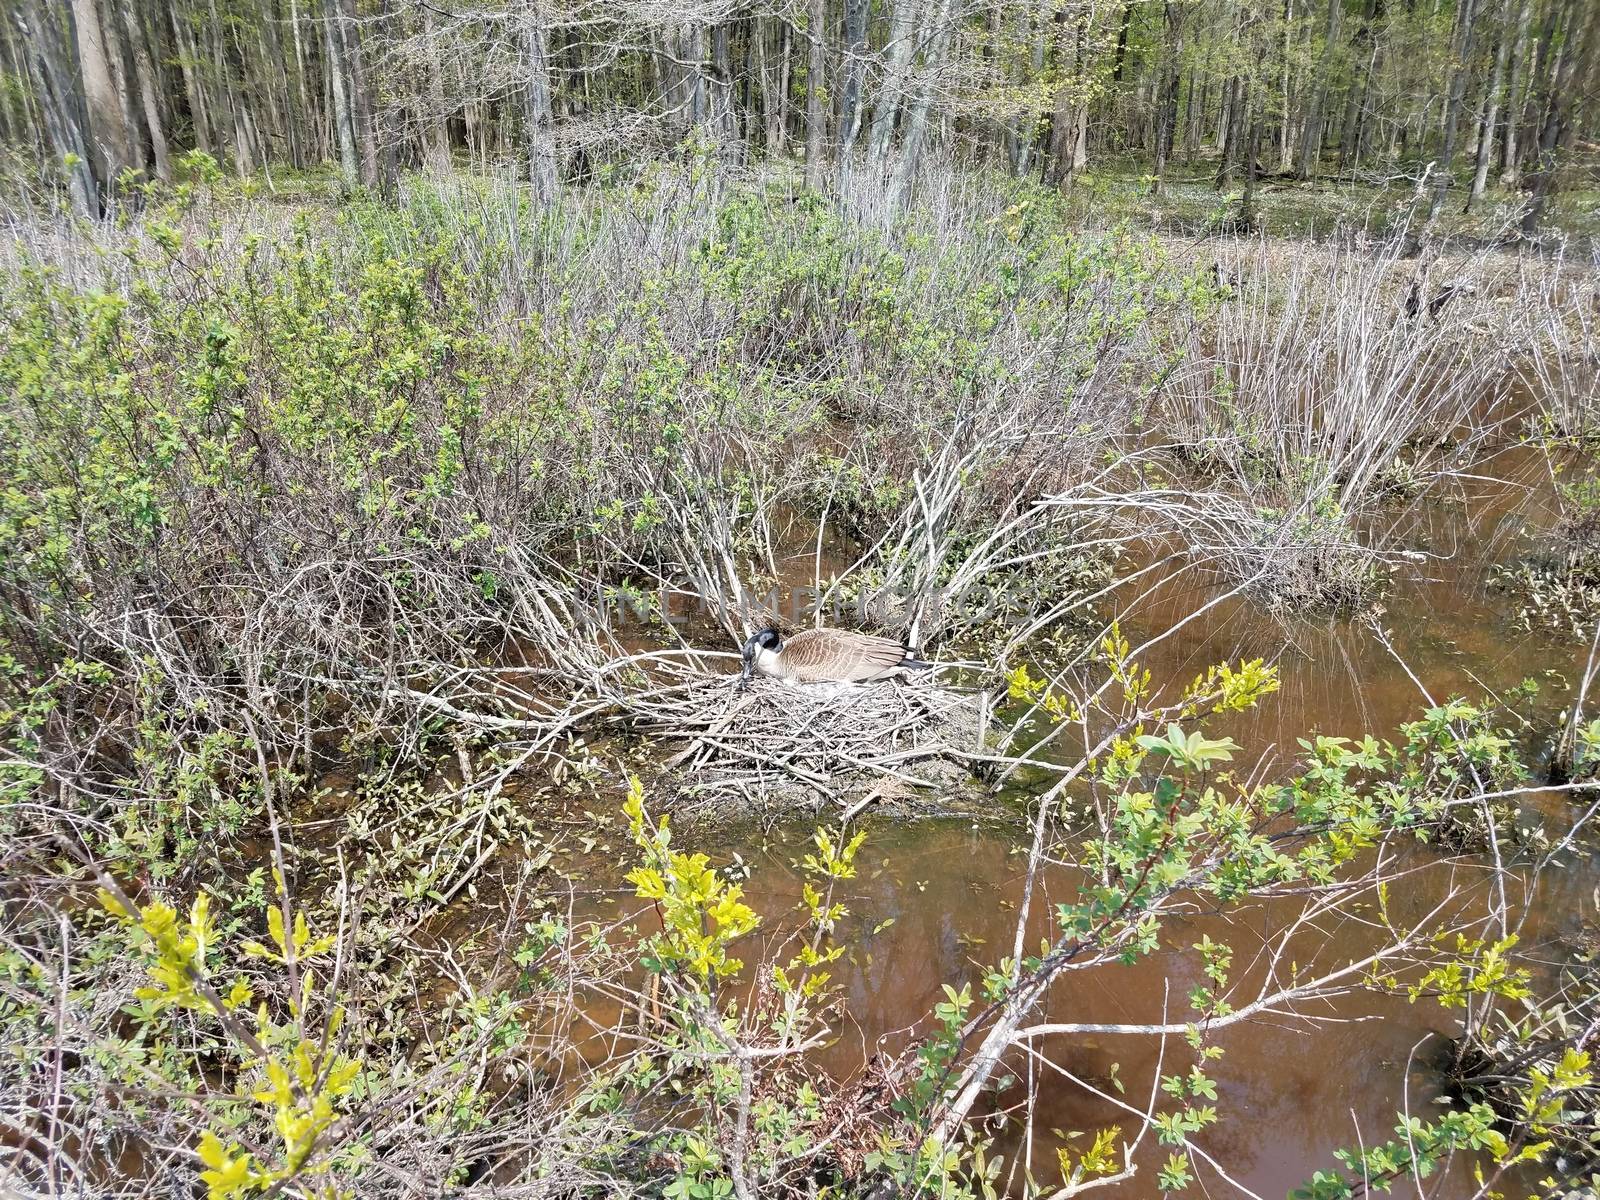 goose on a nest with plants in a wetland or marsh environment